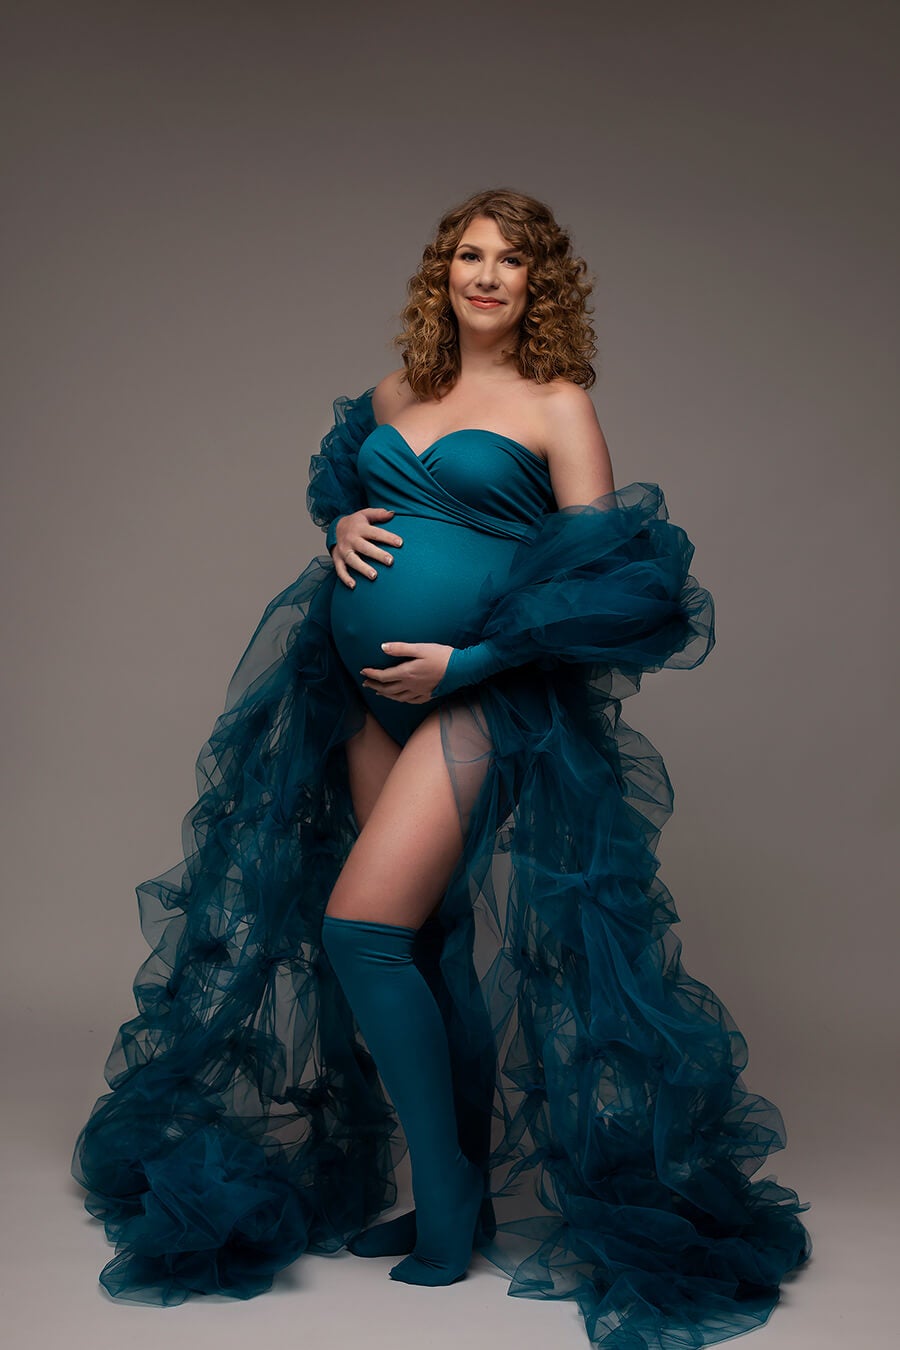 A pregnant woman is posing in a studio She is wearing The woman is wearing high socks, loose sleeves and a bodysuit with a bandeau top. Everything is in the color petrol. She has a tulle scarf by her arms that is going around her back. The rest of the tulle is besides her till the groud.